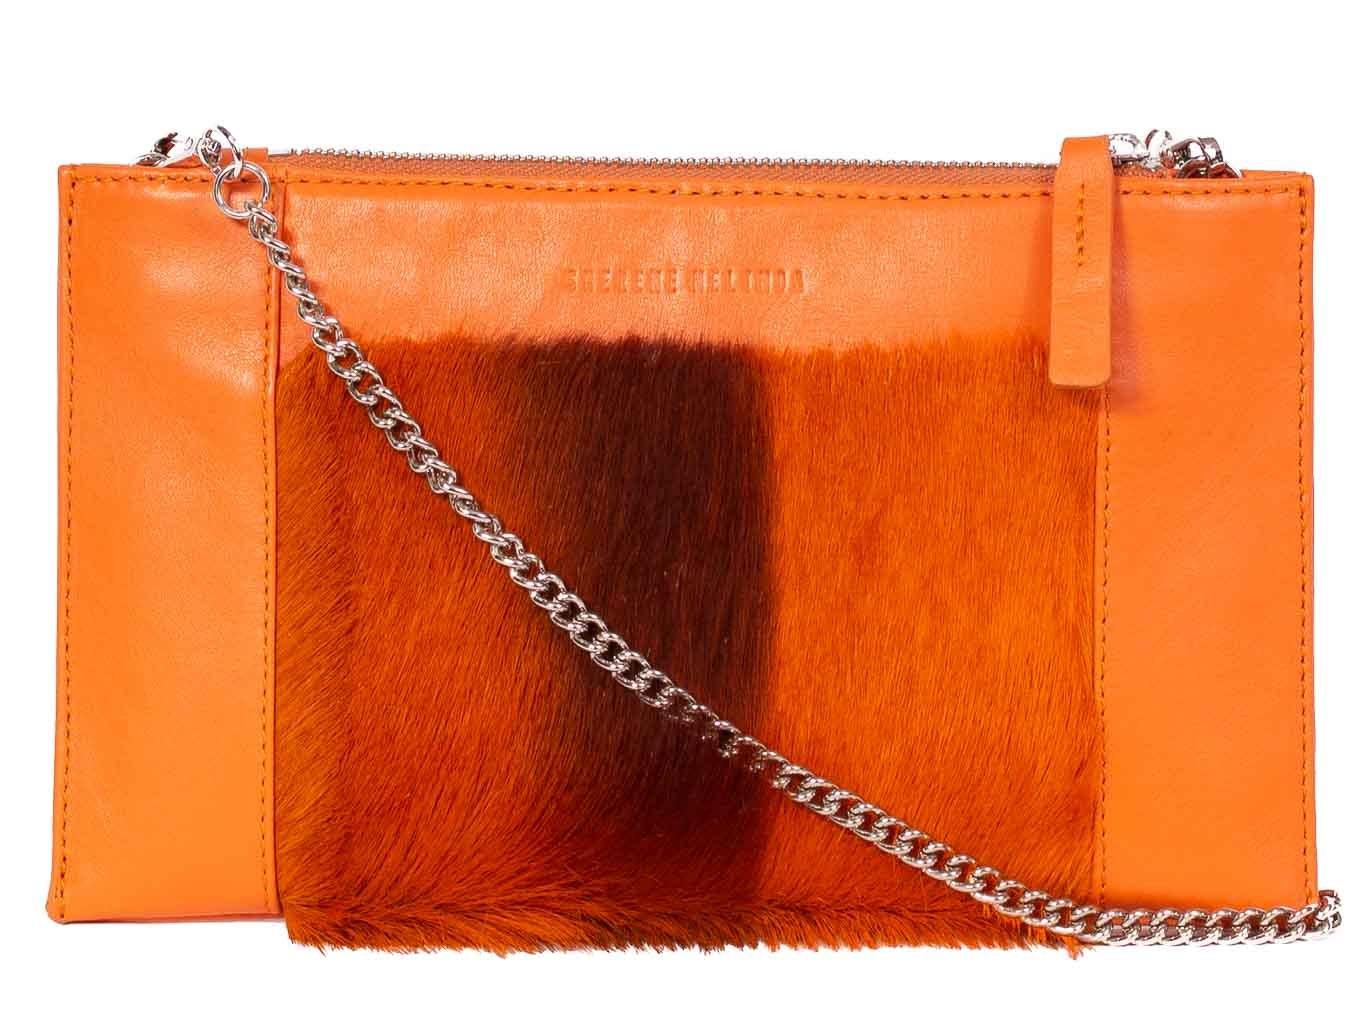 Clutch Springbok Handbag in Orange with a stripe feature by Sherene Melinda front strap